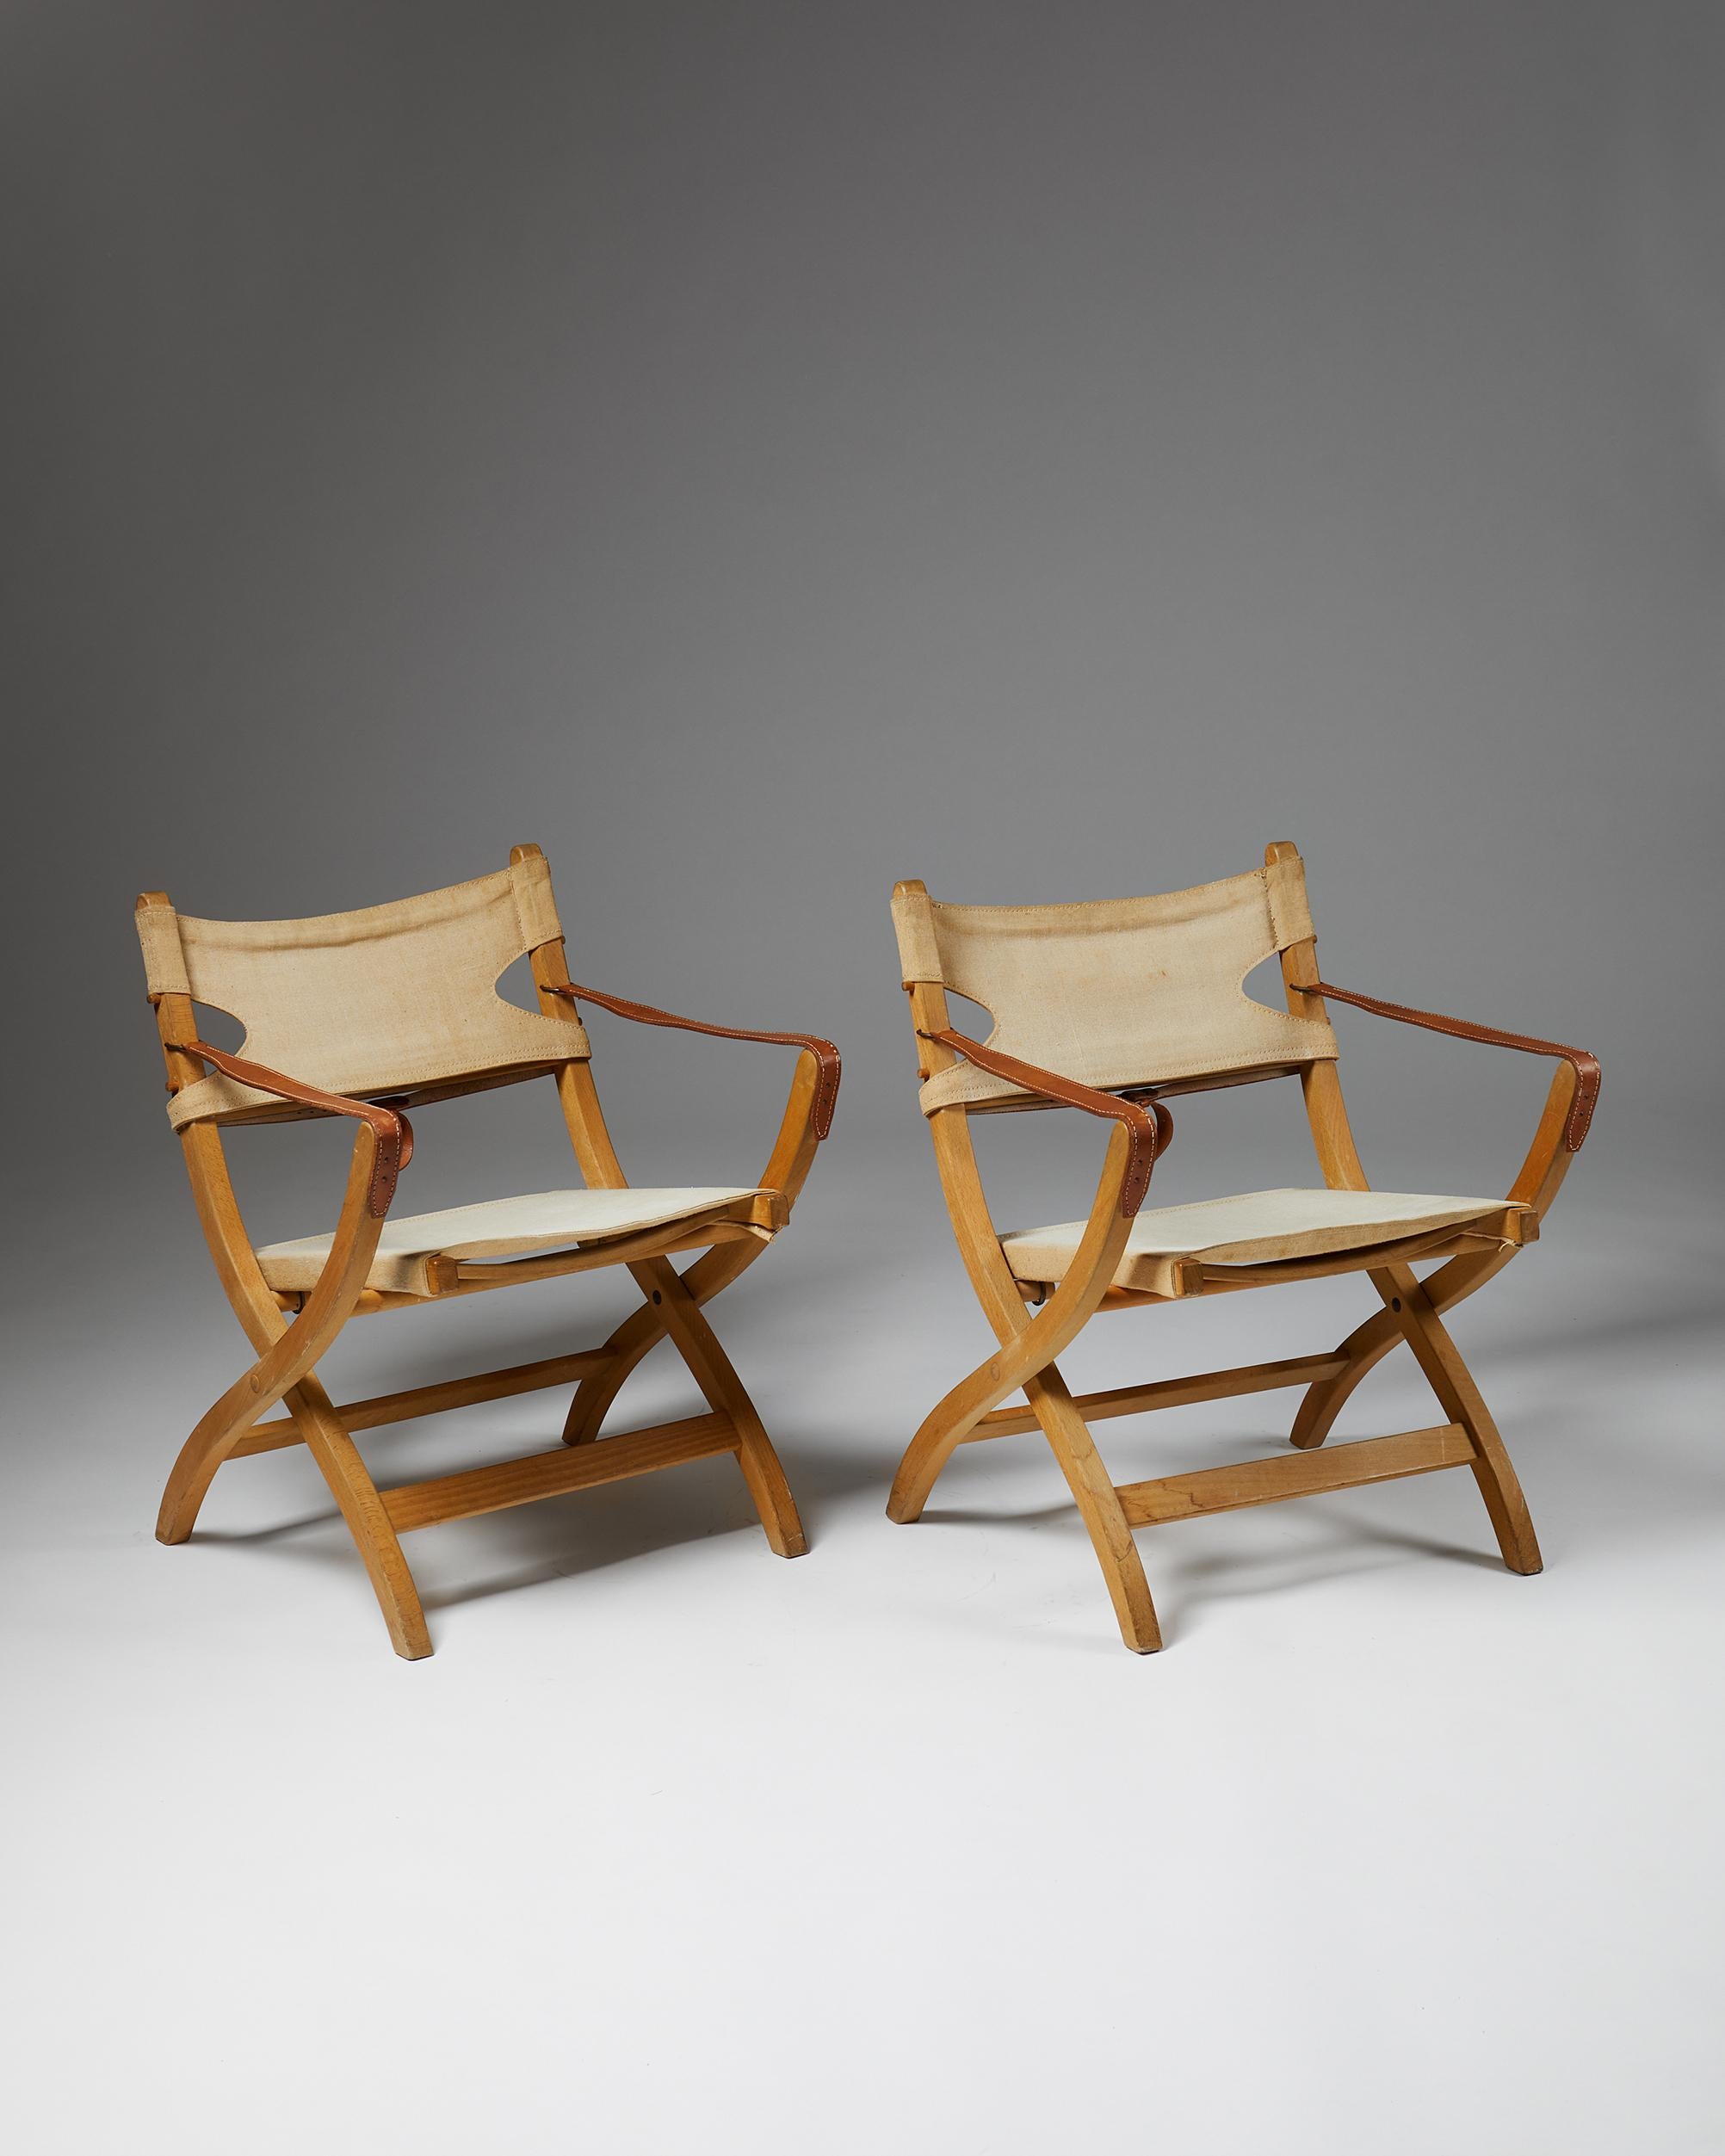 Mid-Century Modern Pair of Folding Chairs Designed by Poul Hundevad for Vamdrup